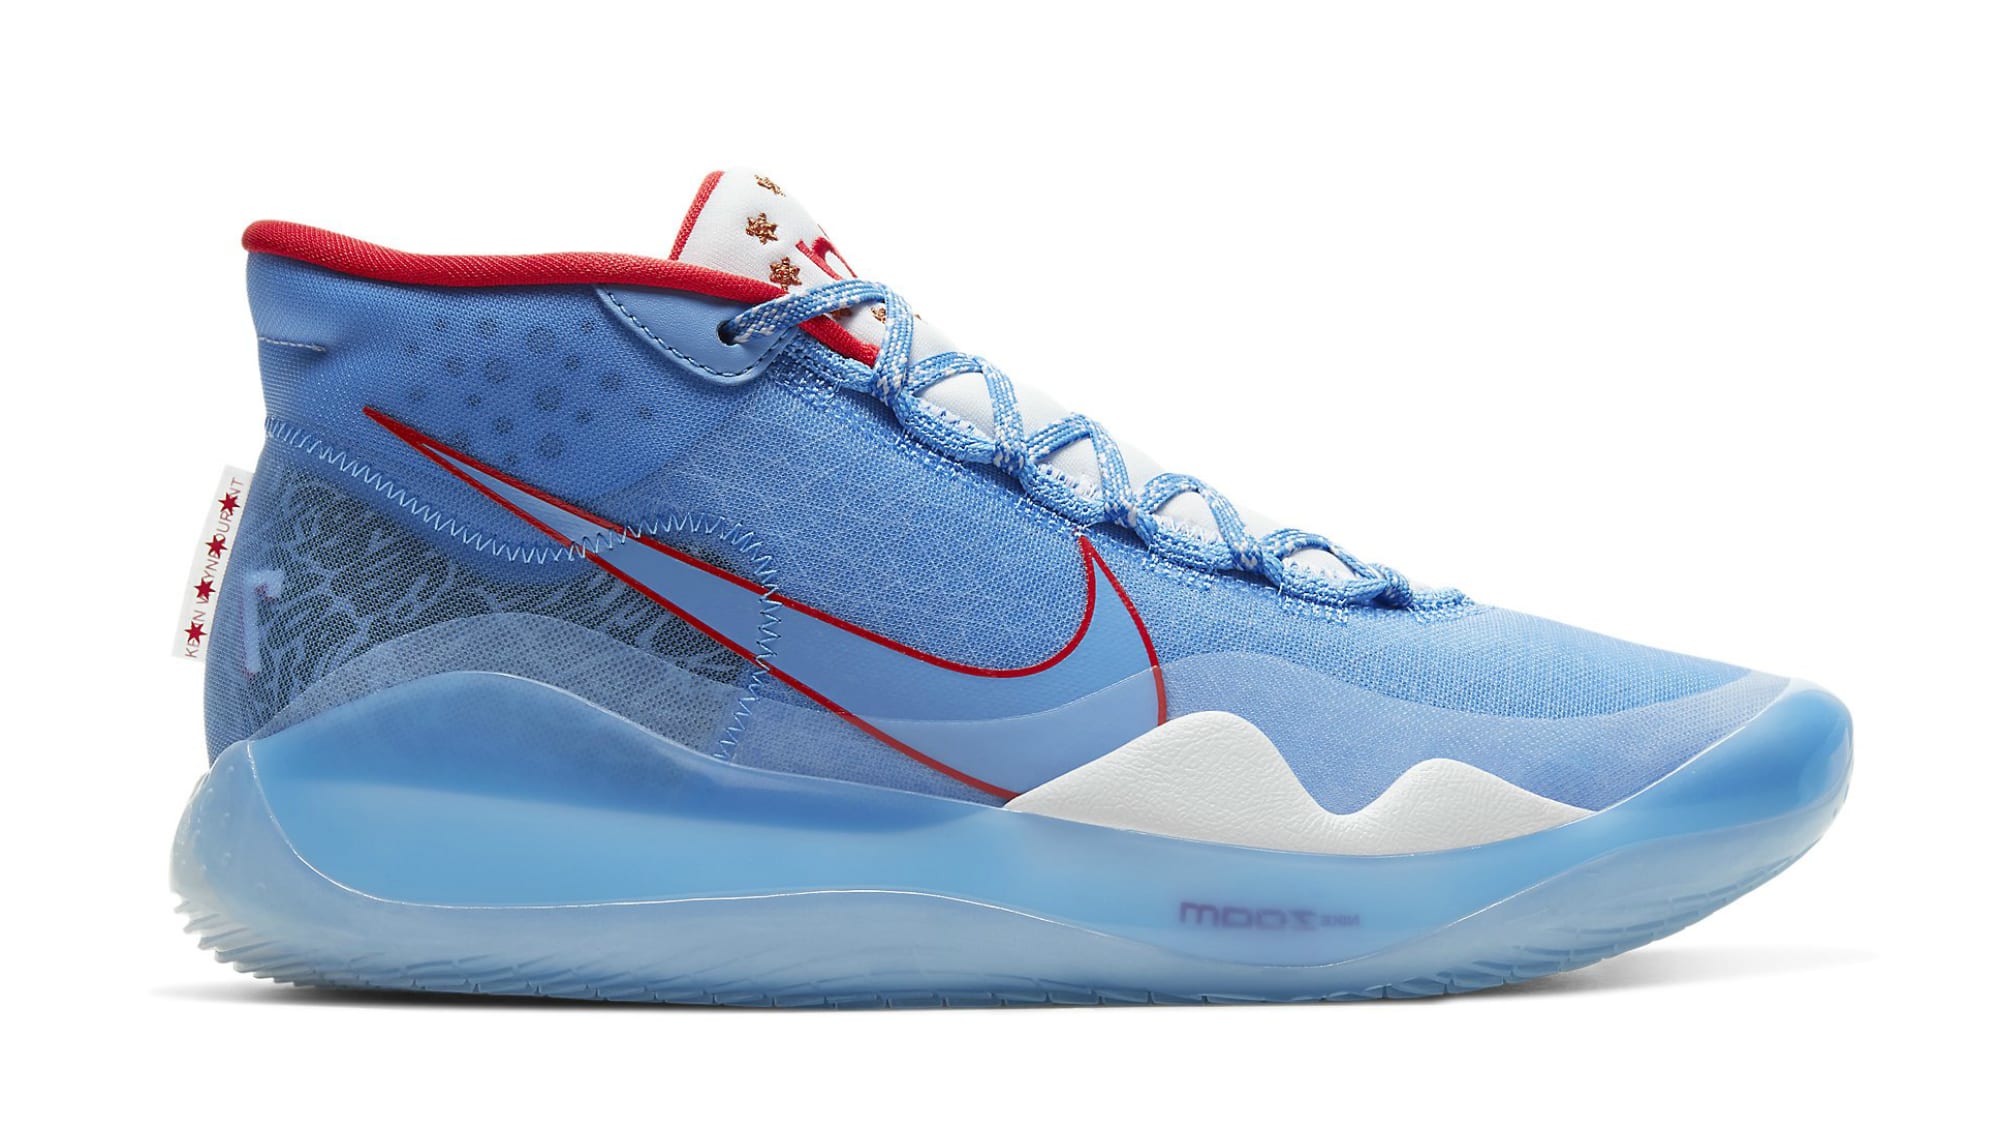 nike-kd-12-don-c-cd4982-900-release-date